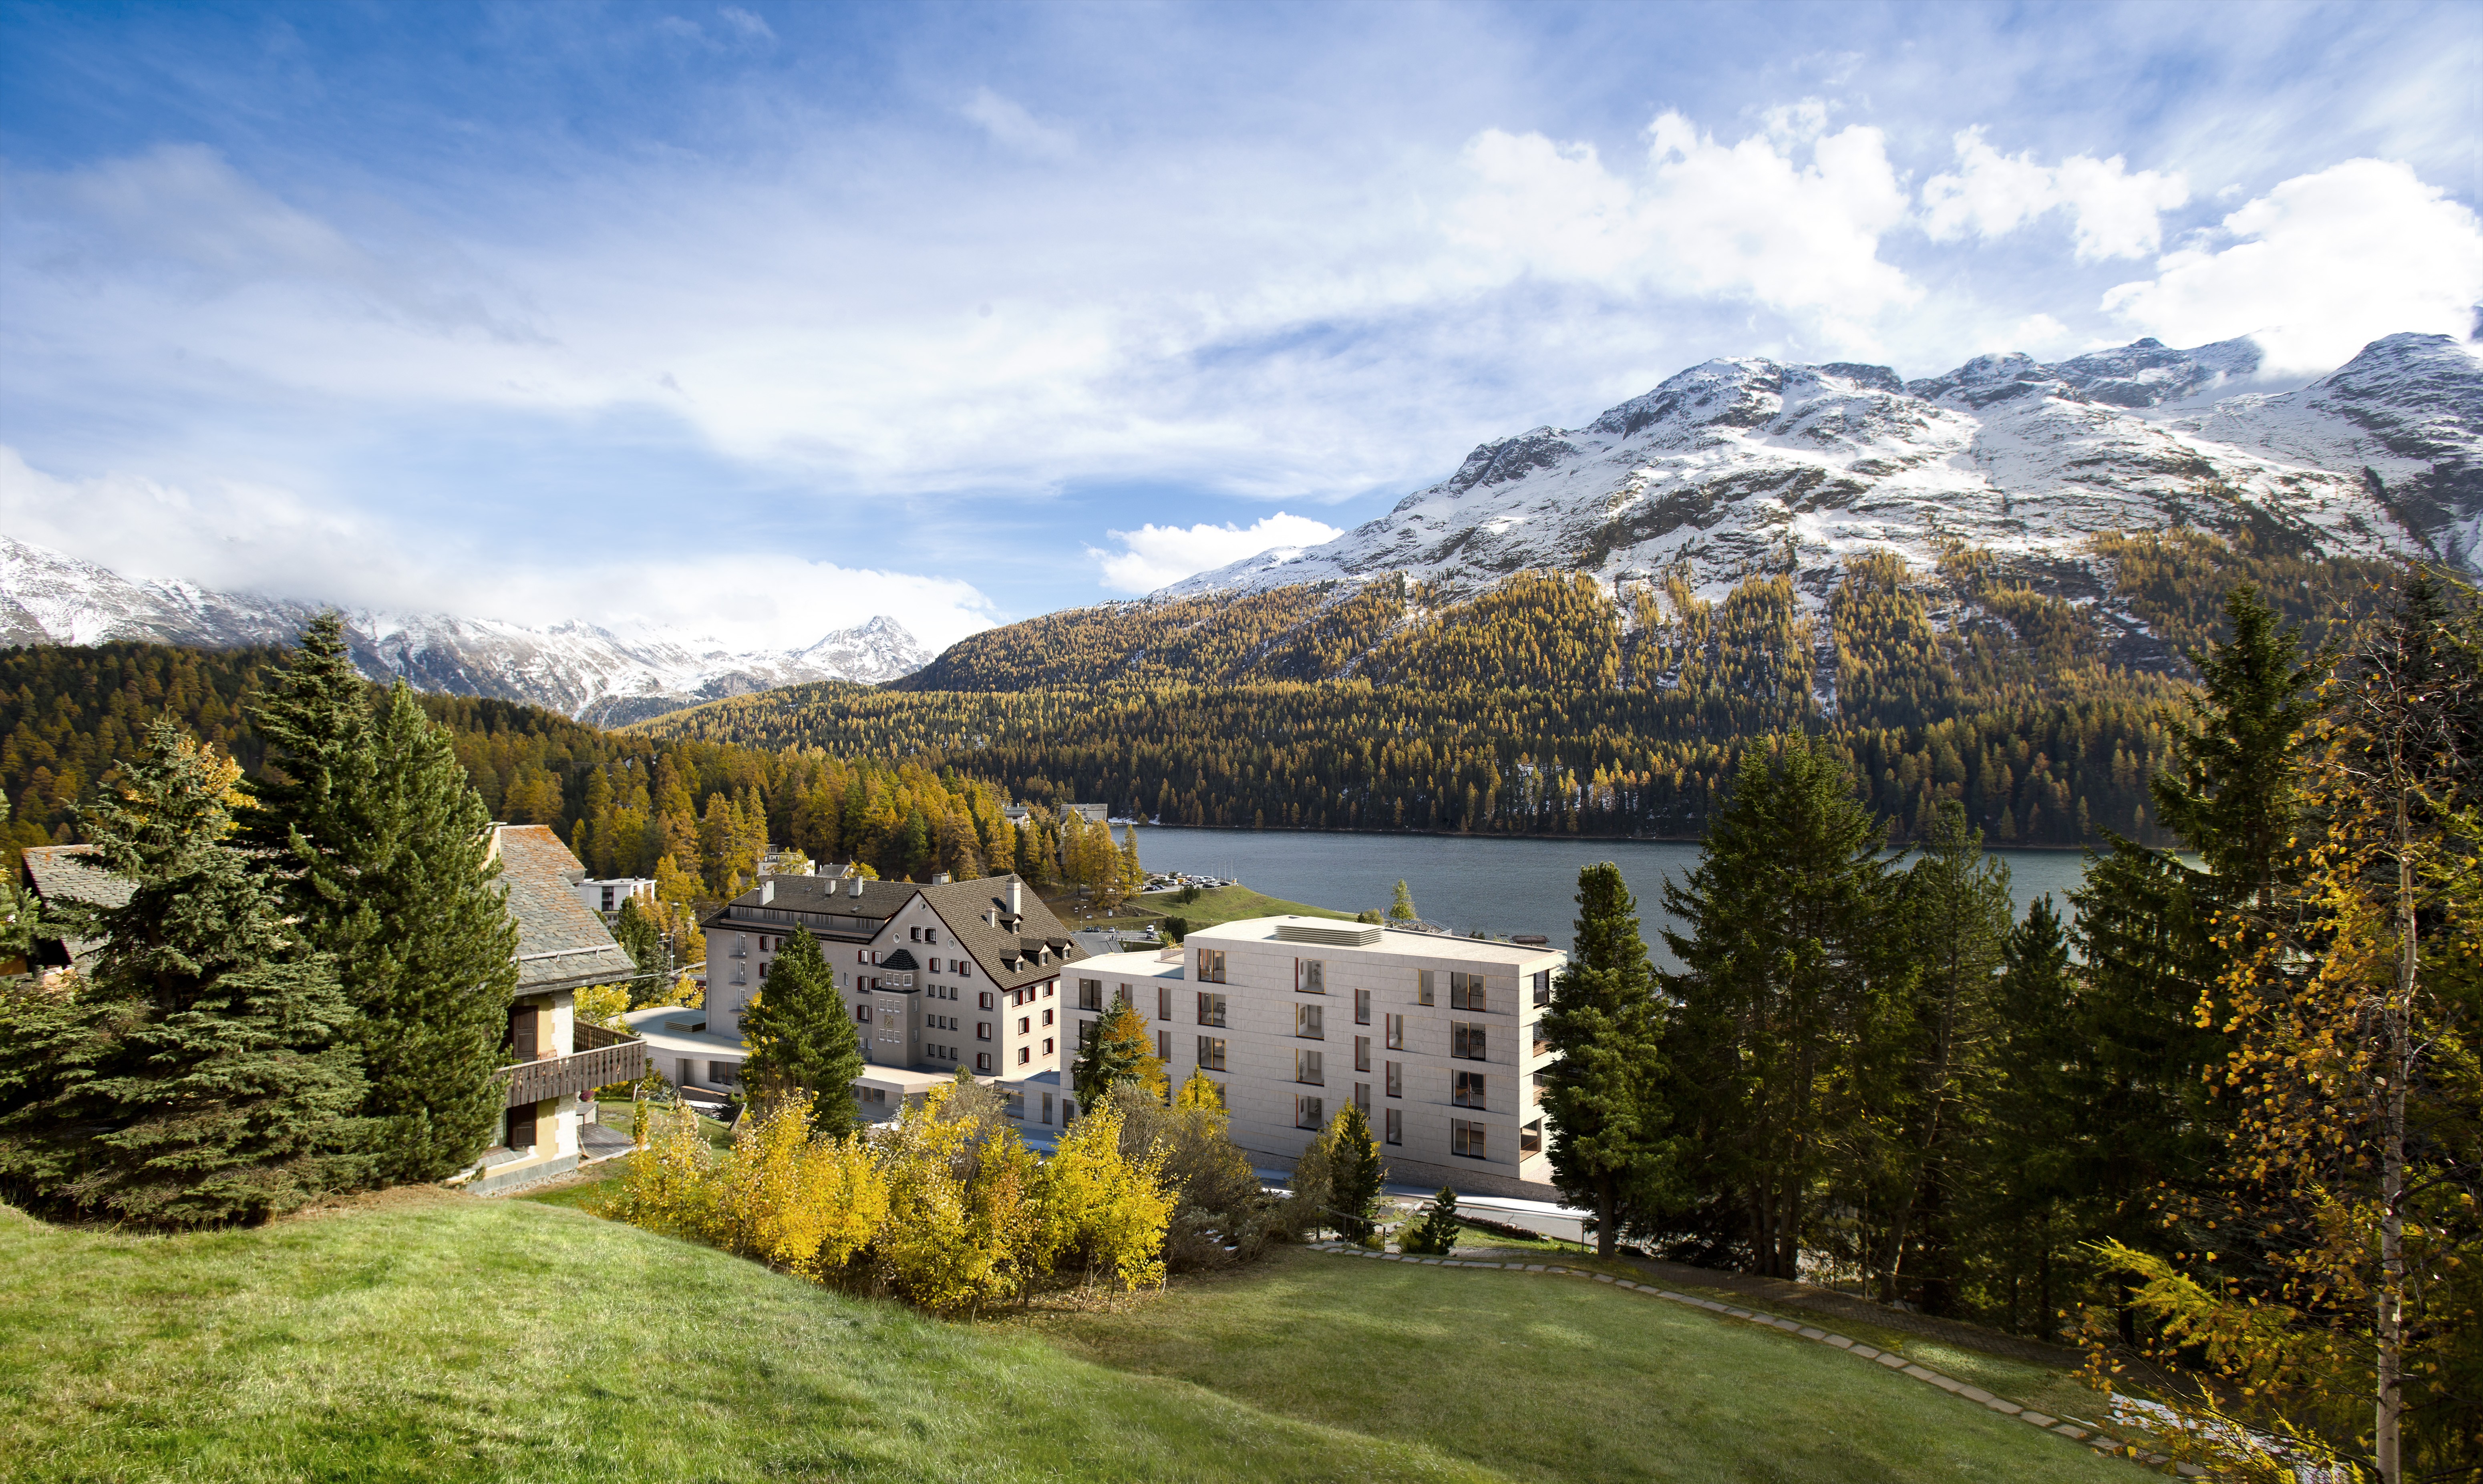 St Moritz offers an idyllic setting for those wishing to get away from it all.